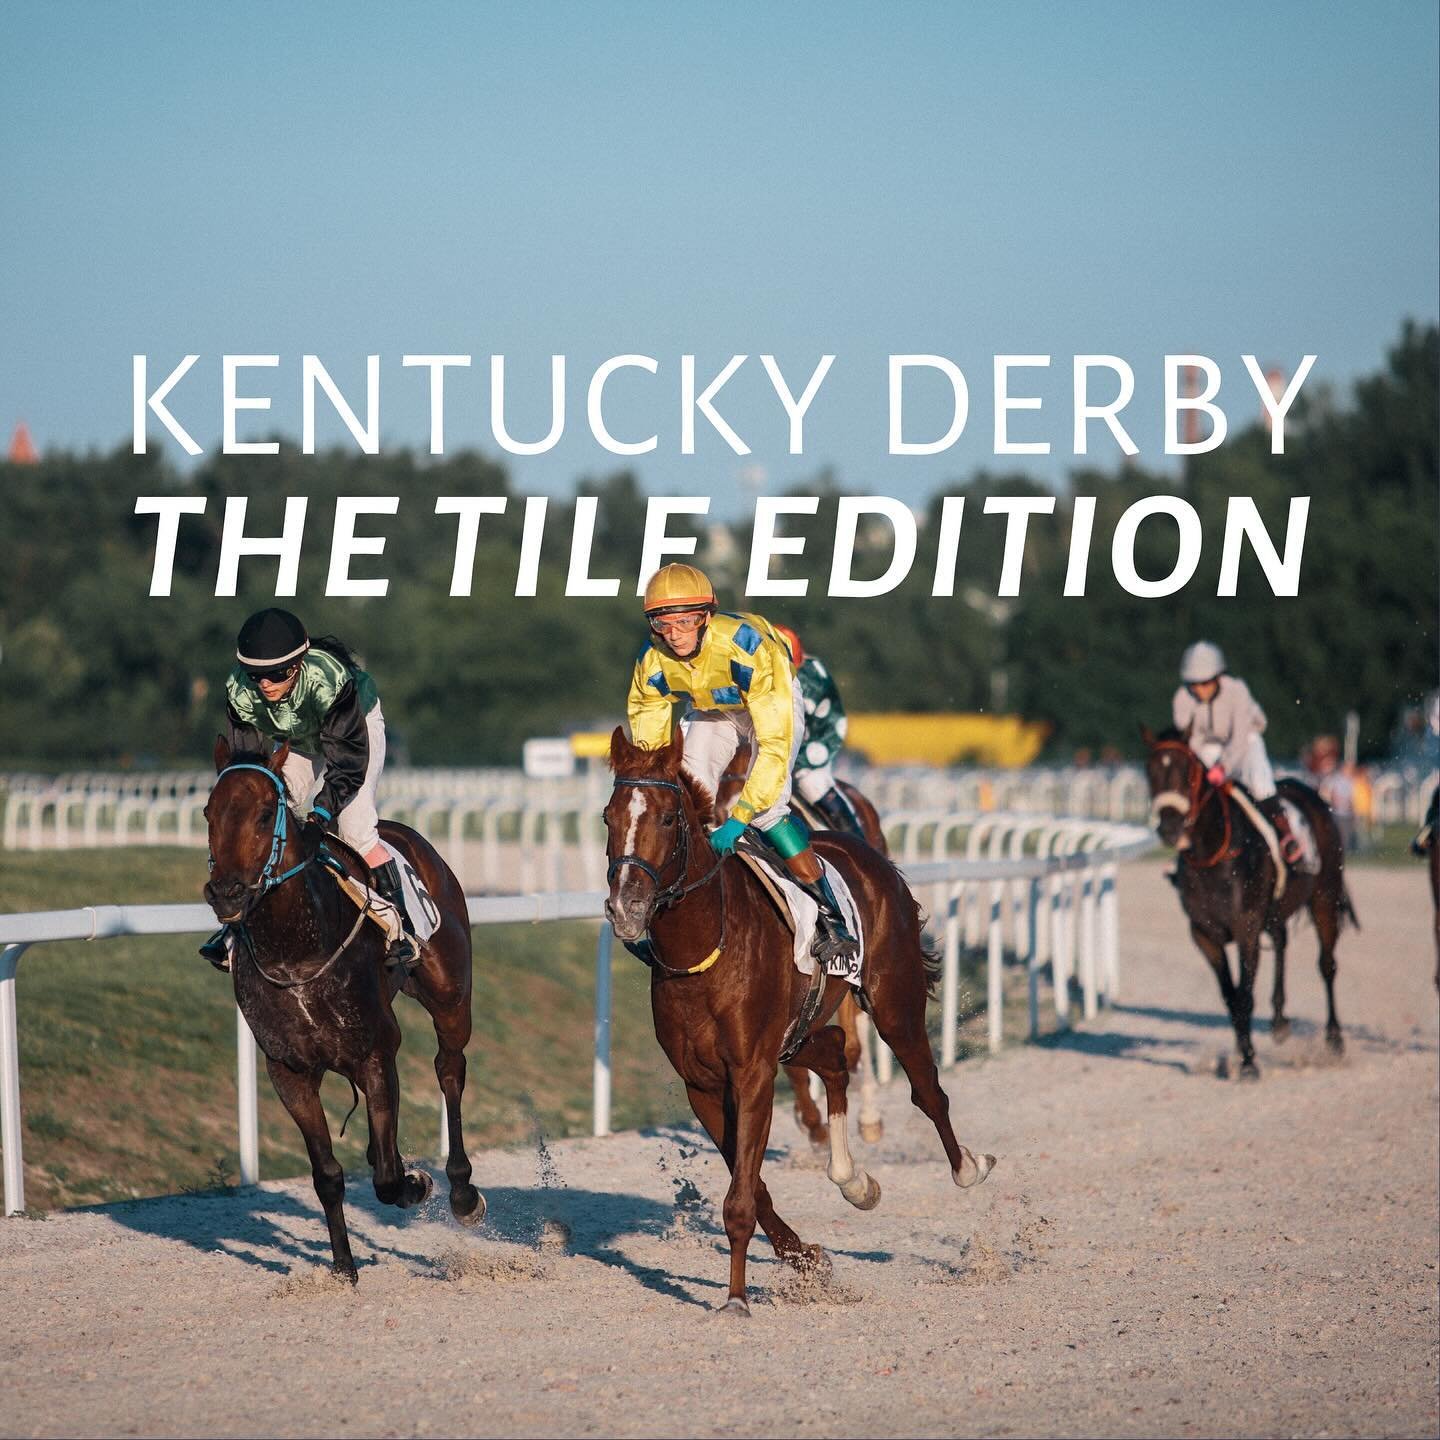 Kentucky Derby, but make it Tile: Tile inspired by some of the horses in the running.  We love bourbon and any reason to wear an extravagant hat, but the horses are the stars of the show.